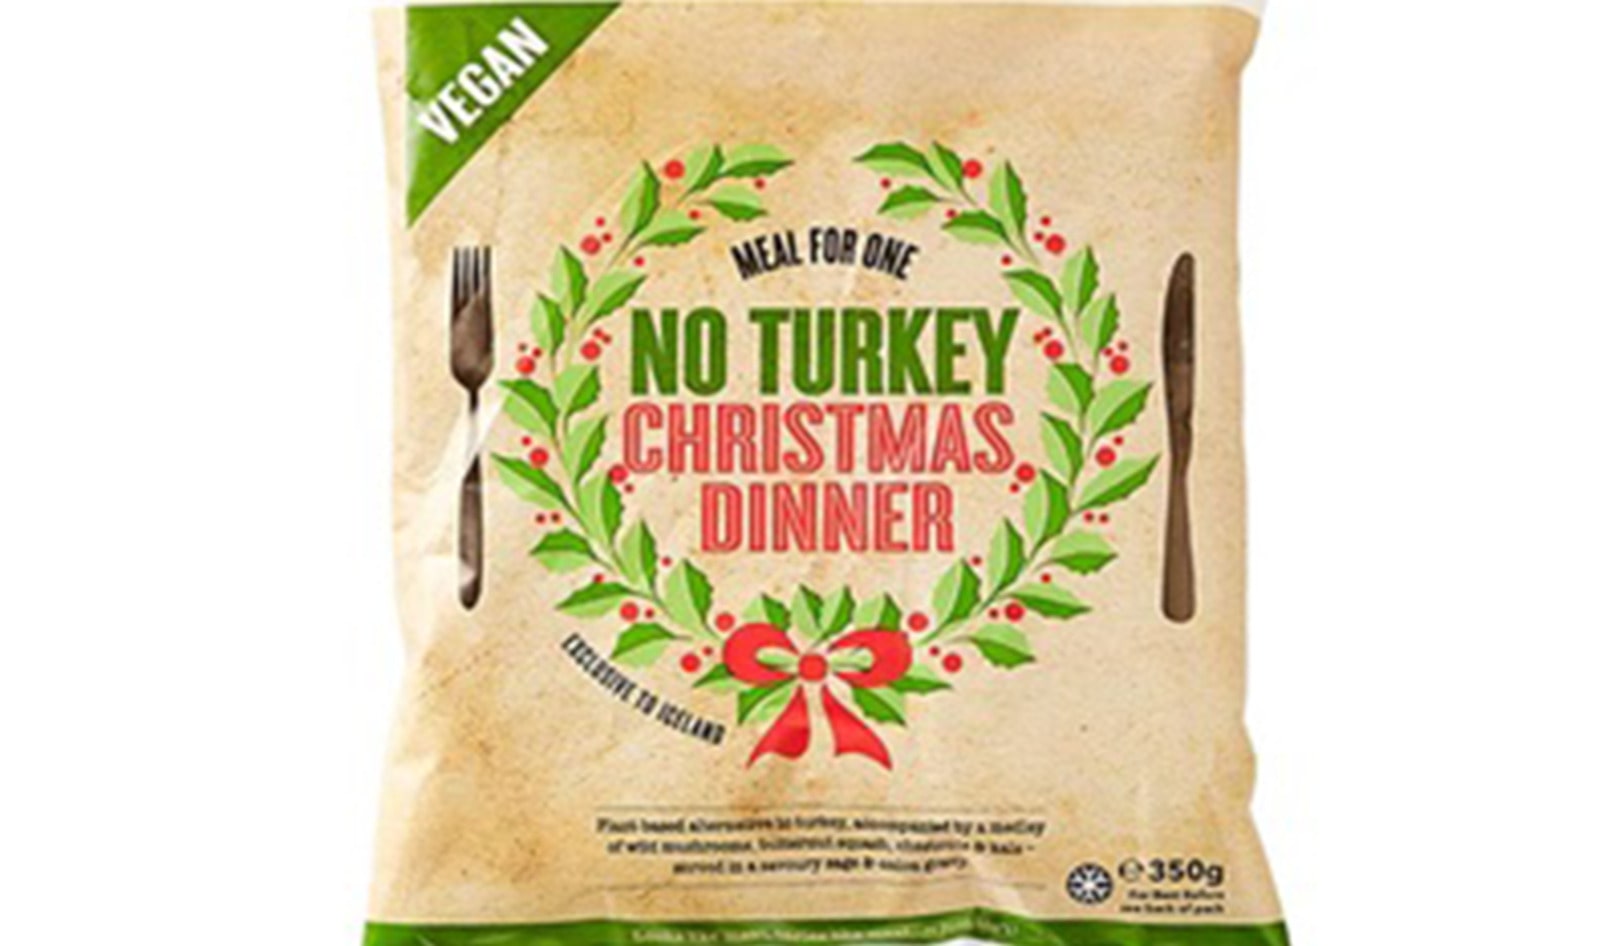 Vegan Turkey Dinner Launches at Iceland Supermarkets for Christmas